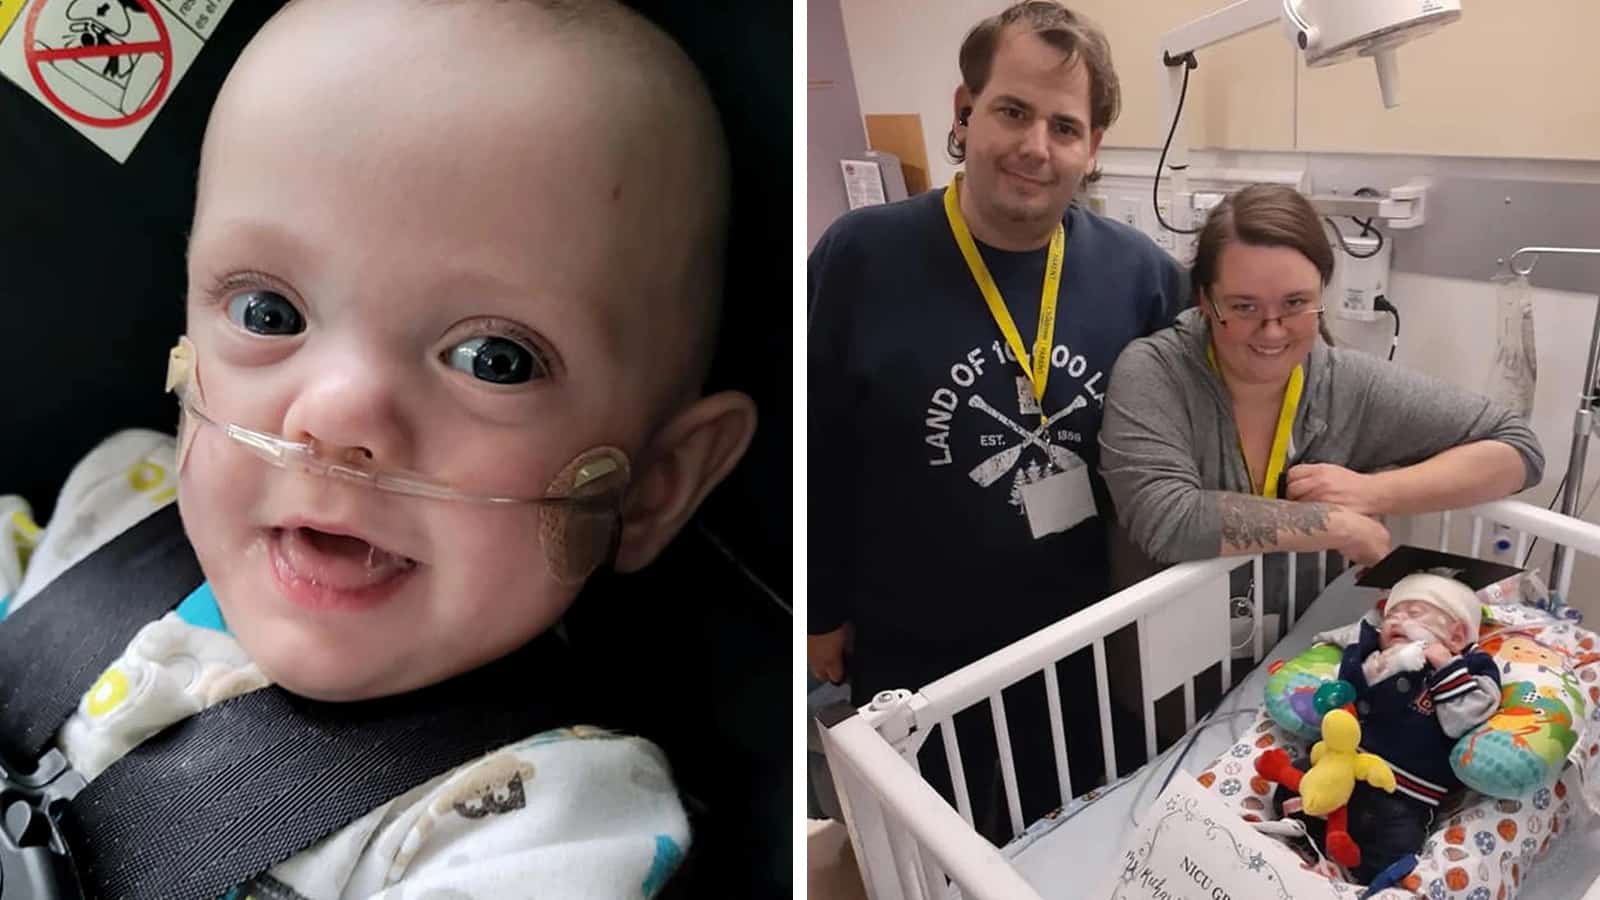 21-Week Preemie Who Defied the Odds Celebrated His First Birthday